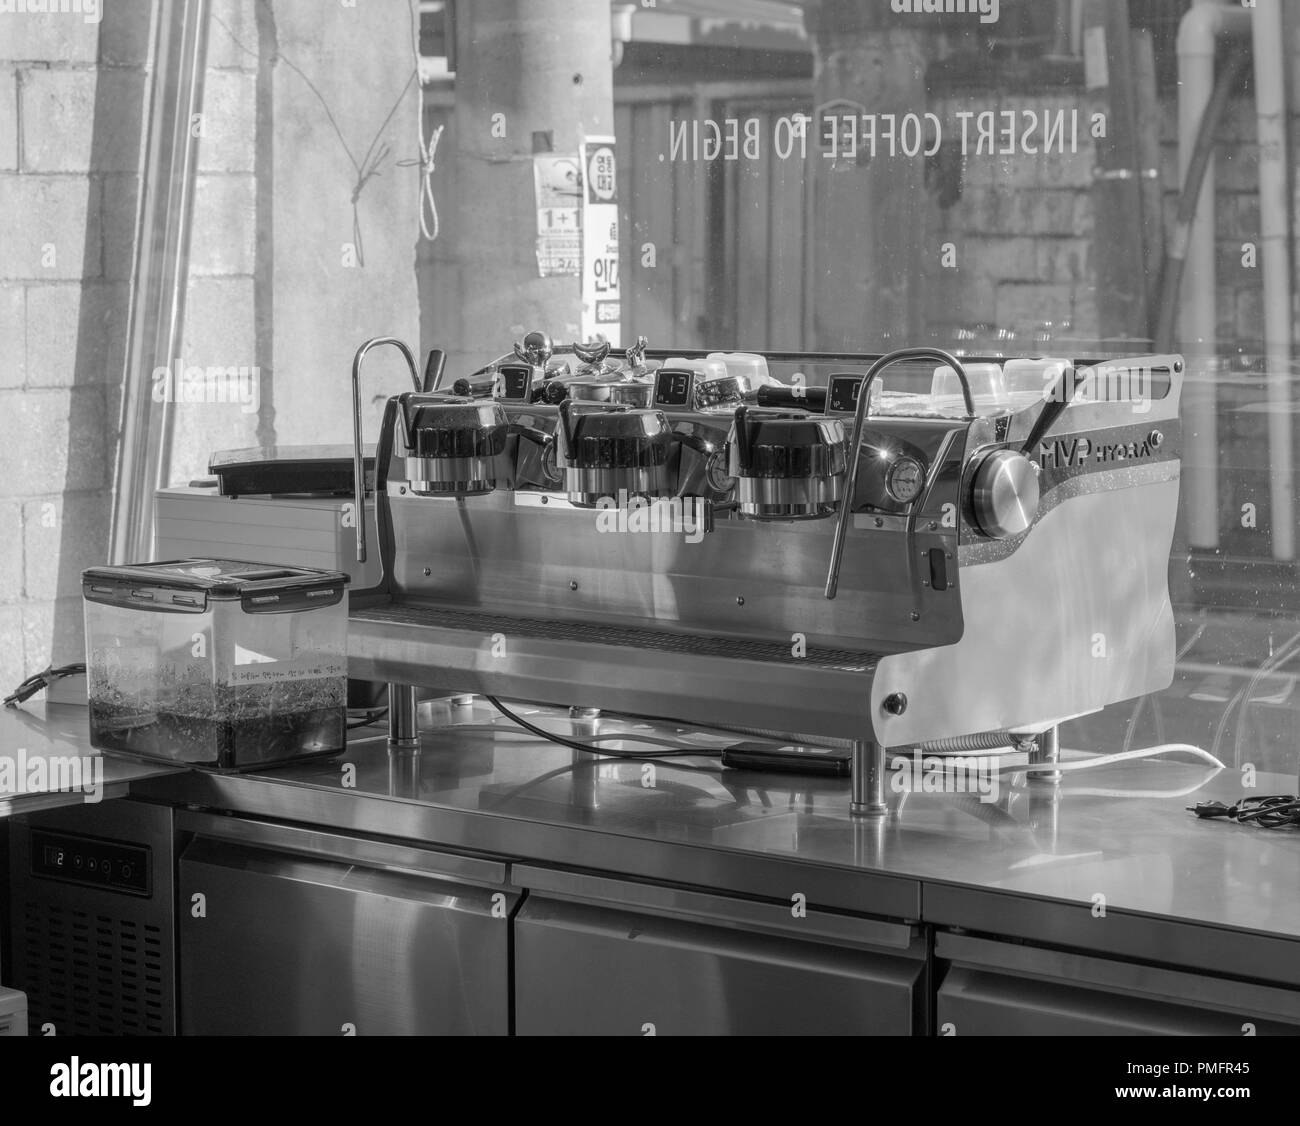 Shot of an espresso machine in black and white, in front of a glass window in the popular Onion Cafe, Seongdong-gu neighborhood, Seoul, South Korea Stock Photo